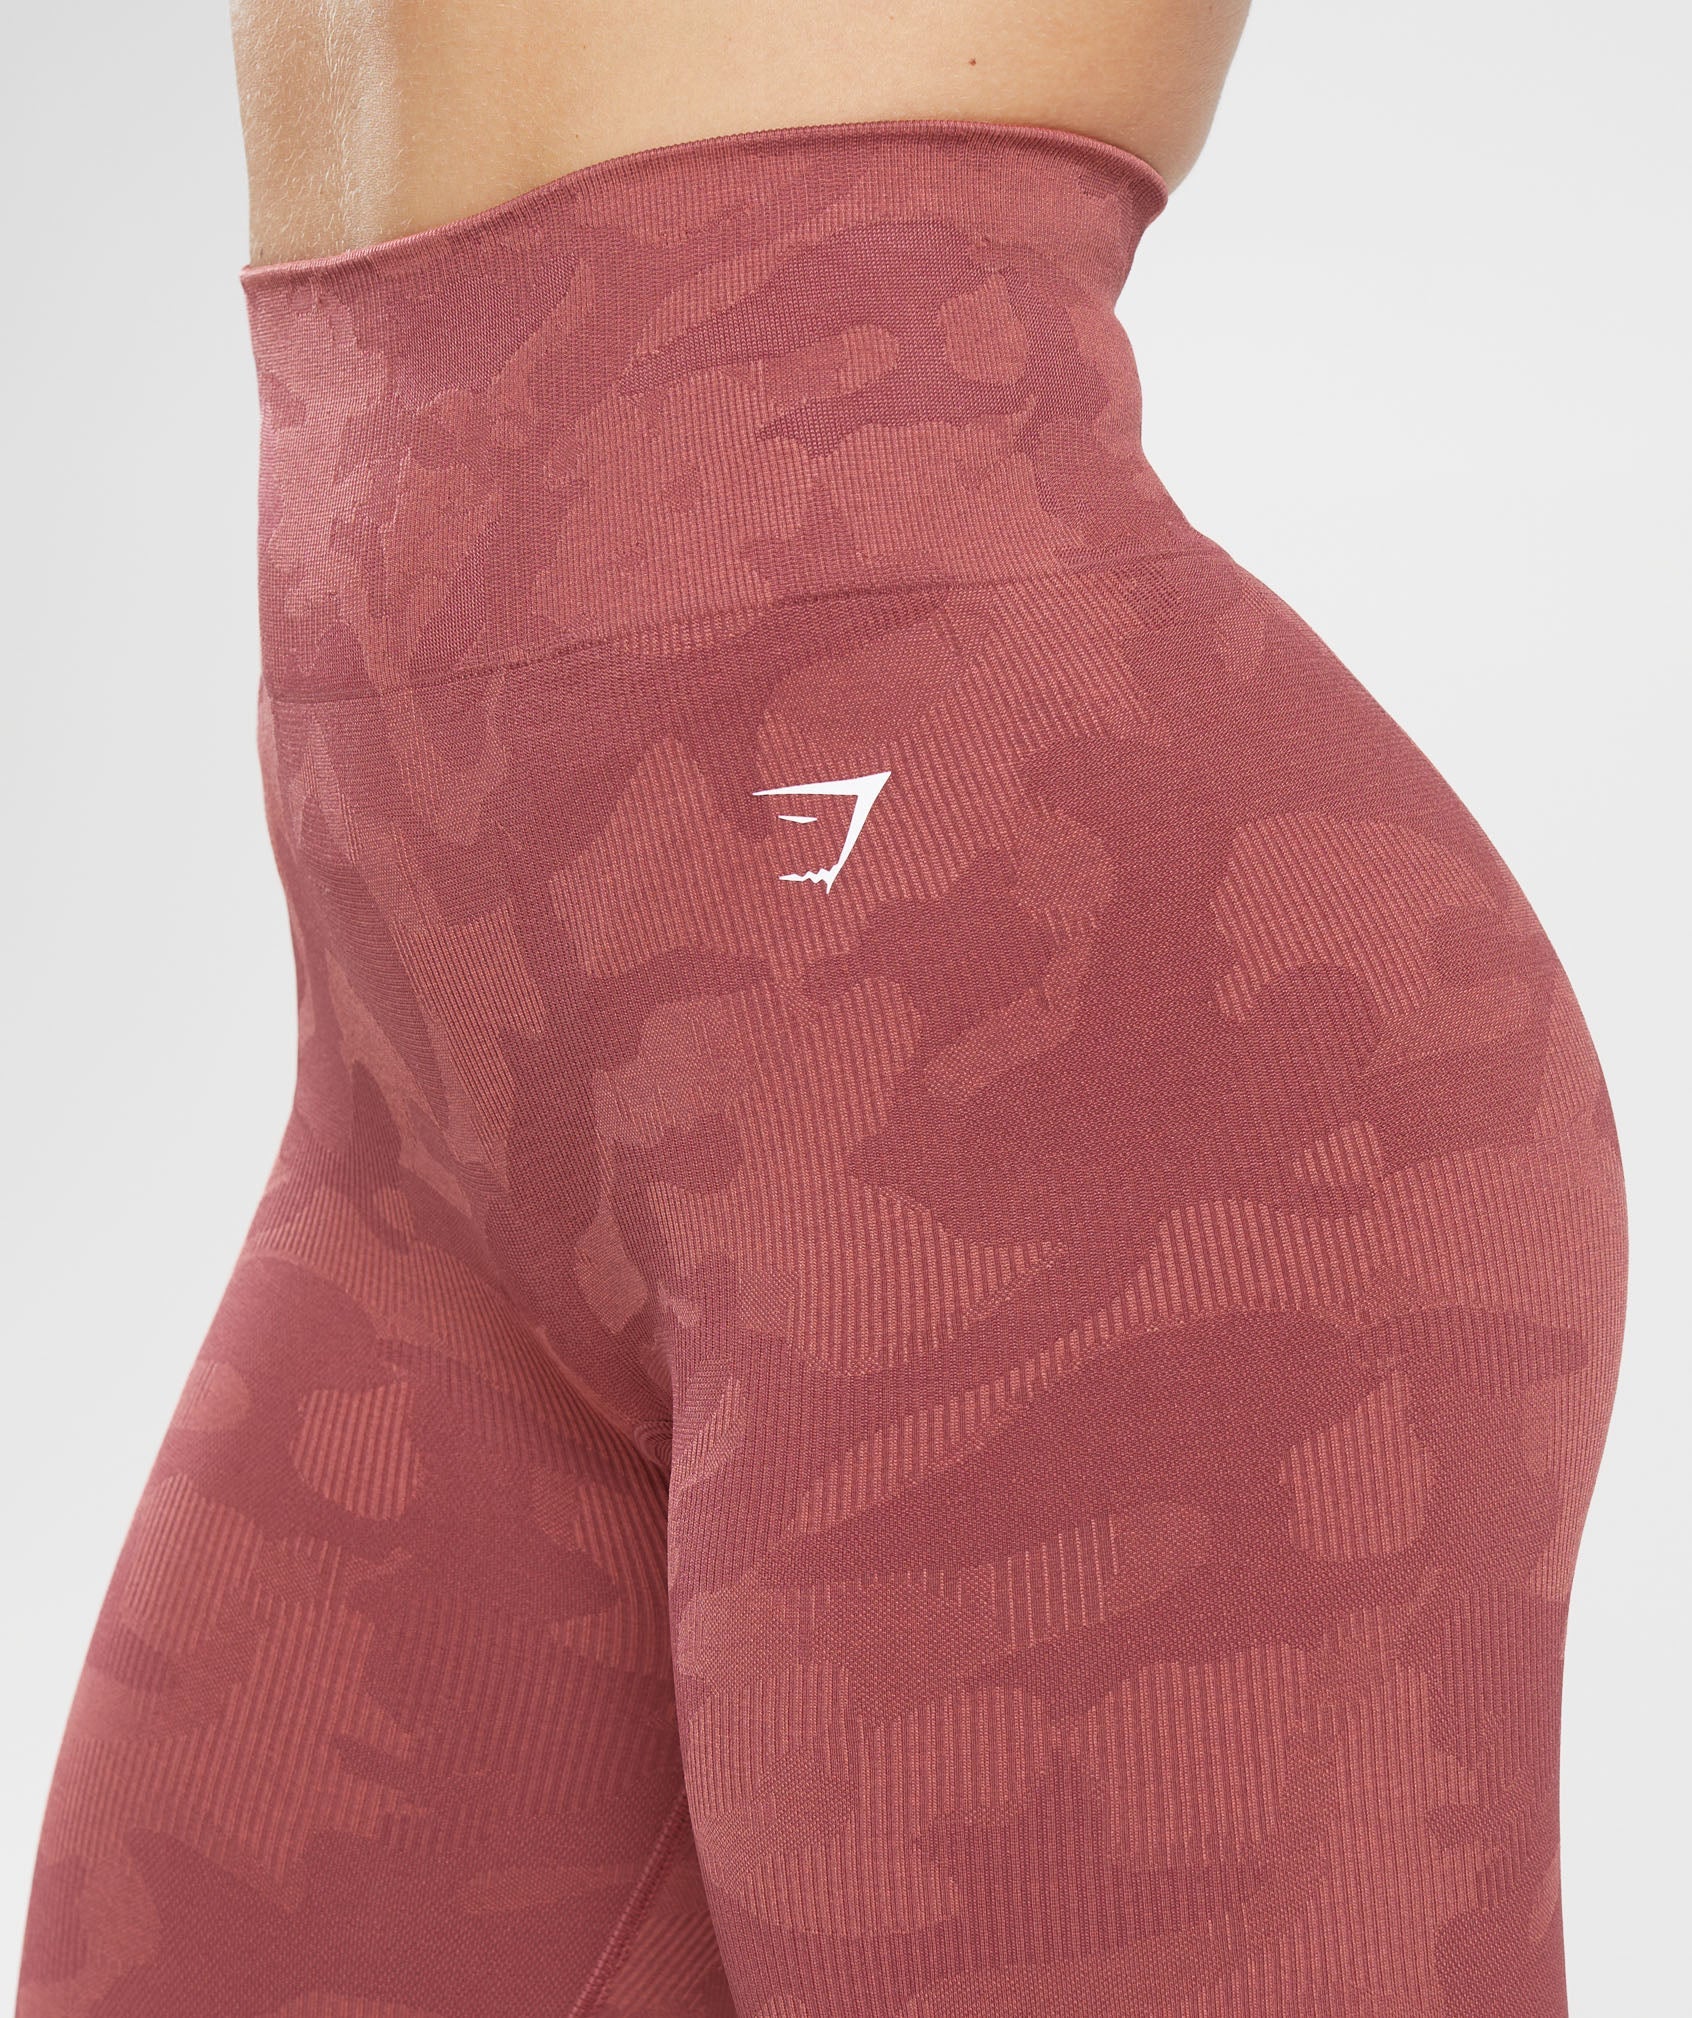 Leggings Gymshark Camo  International Society of Precision Agriculture